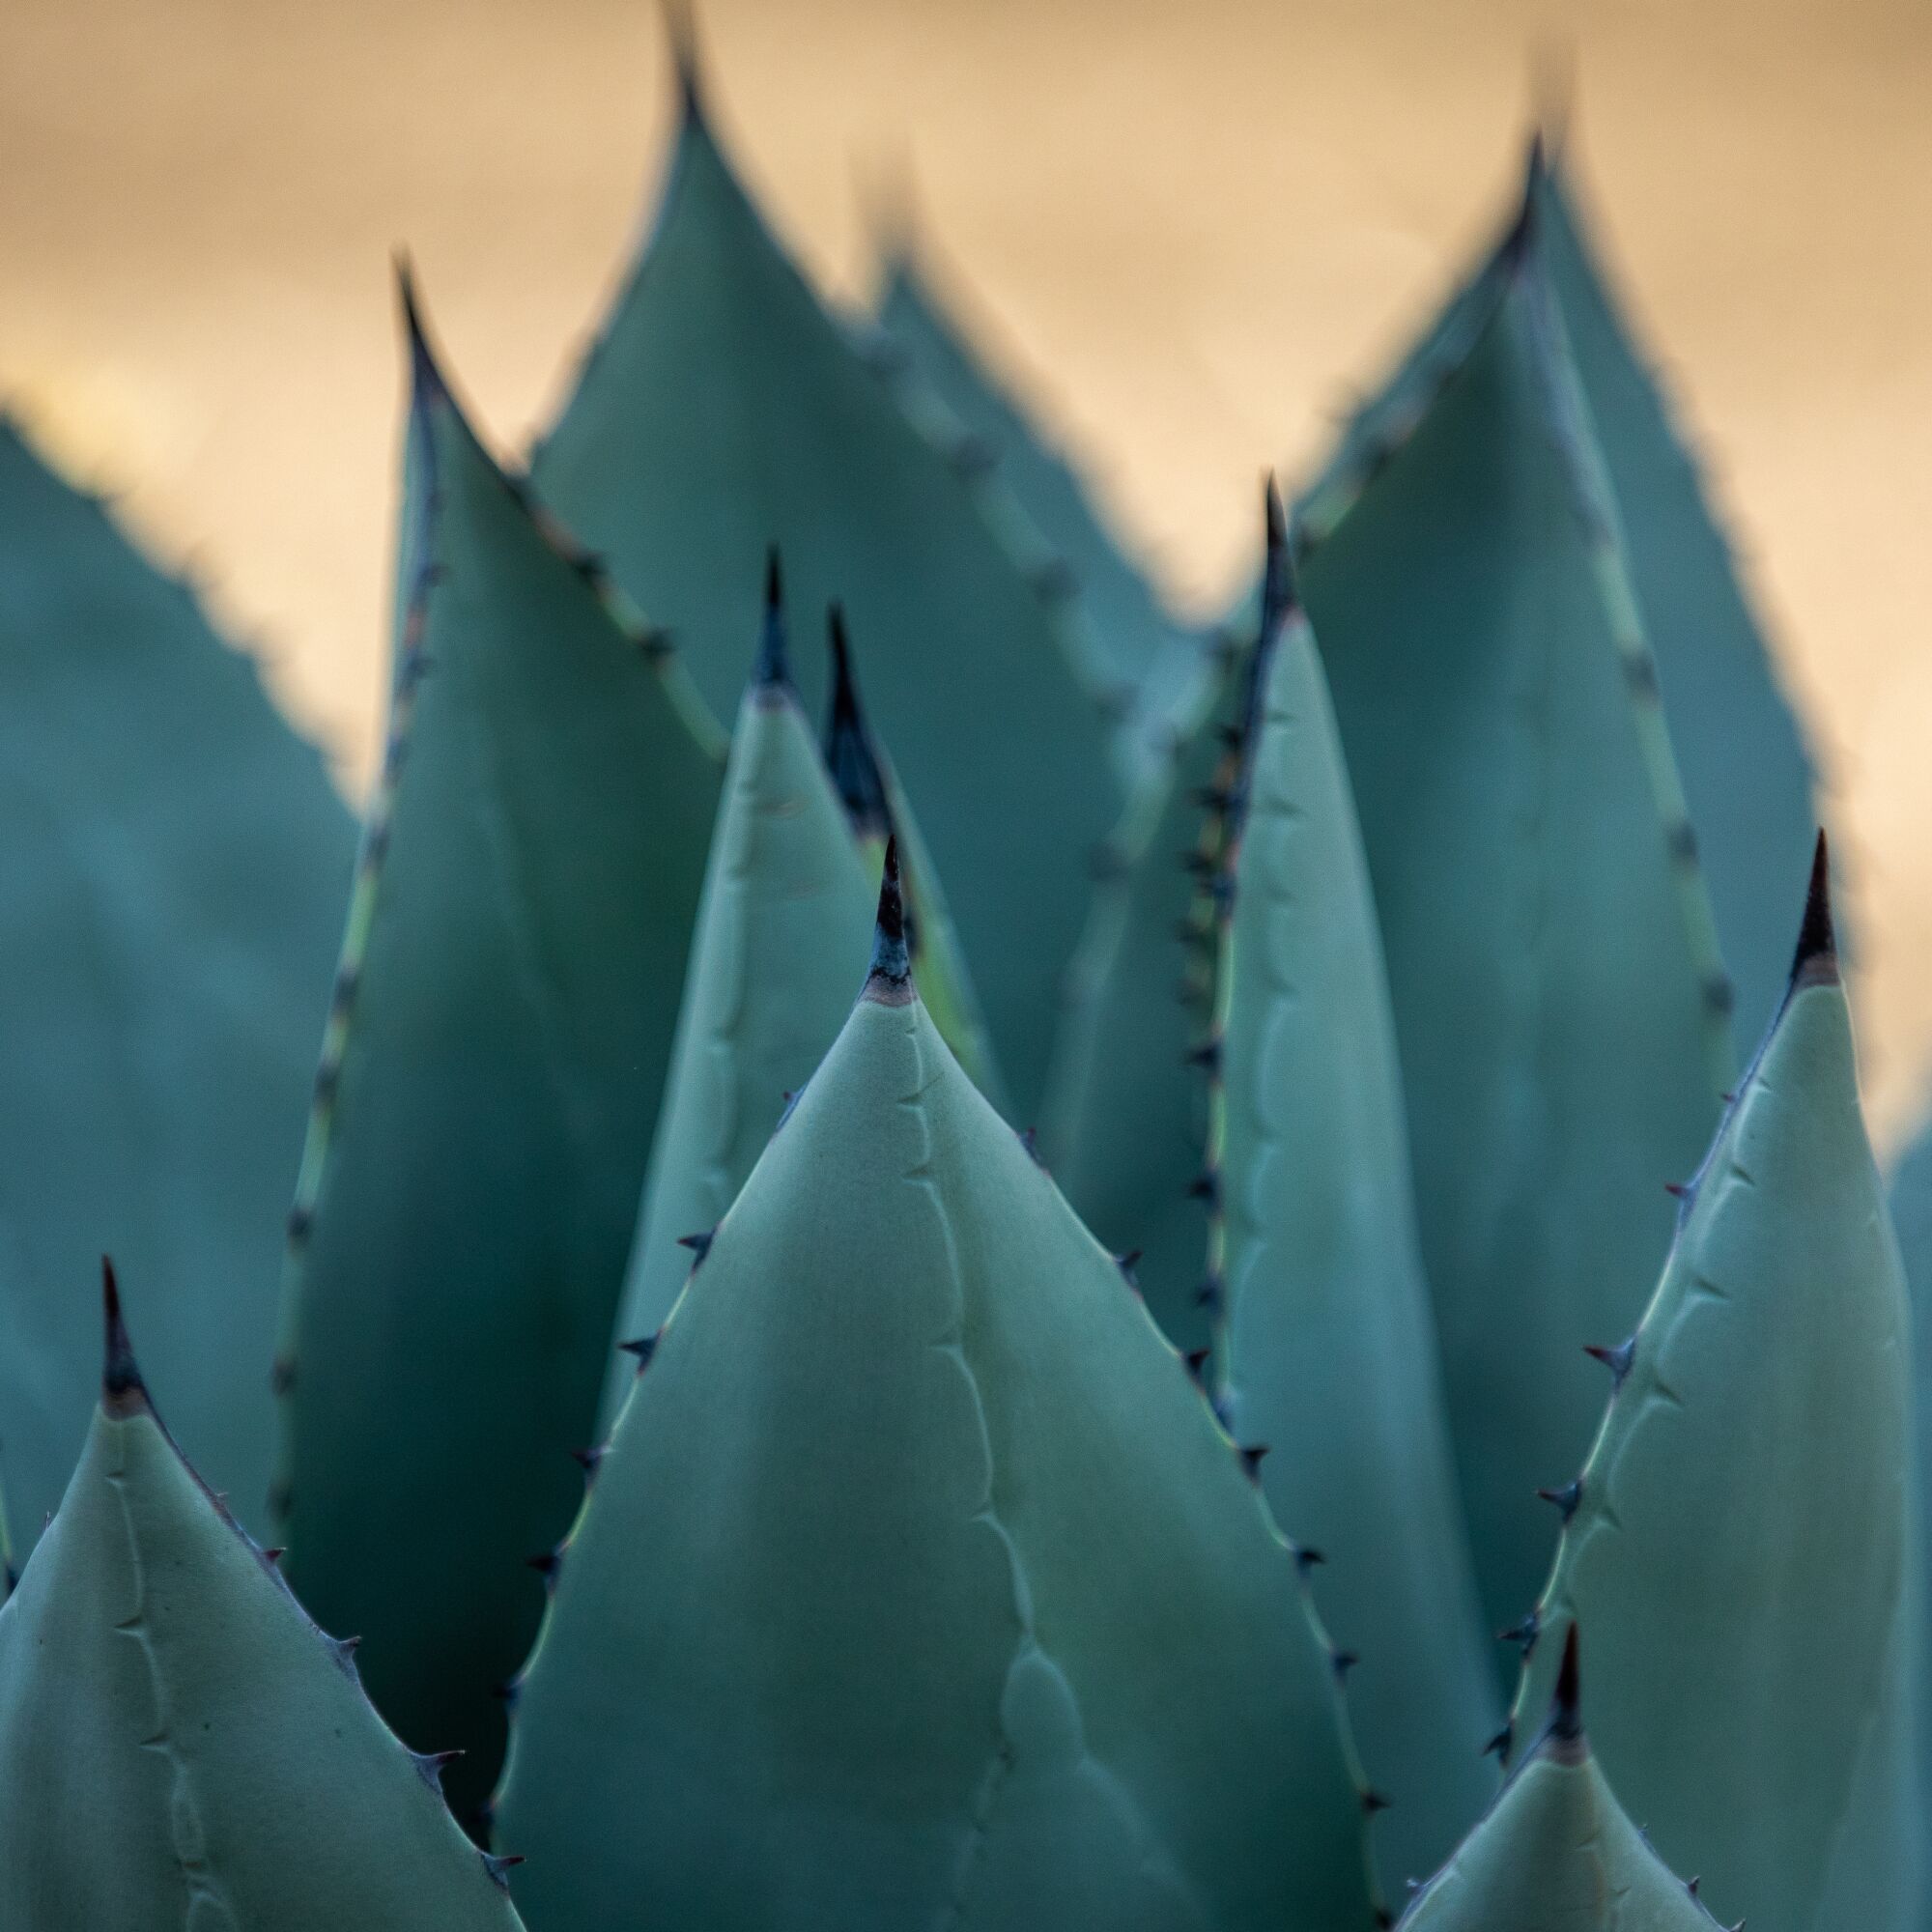 A closeup photo of the spike-tipped leaves of an Agave truncata